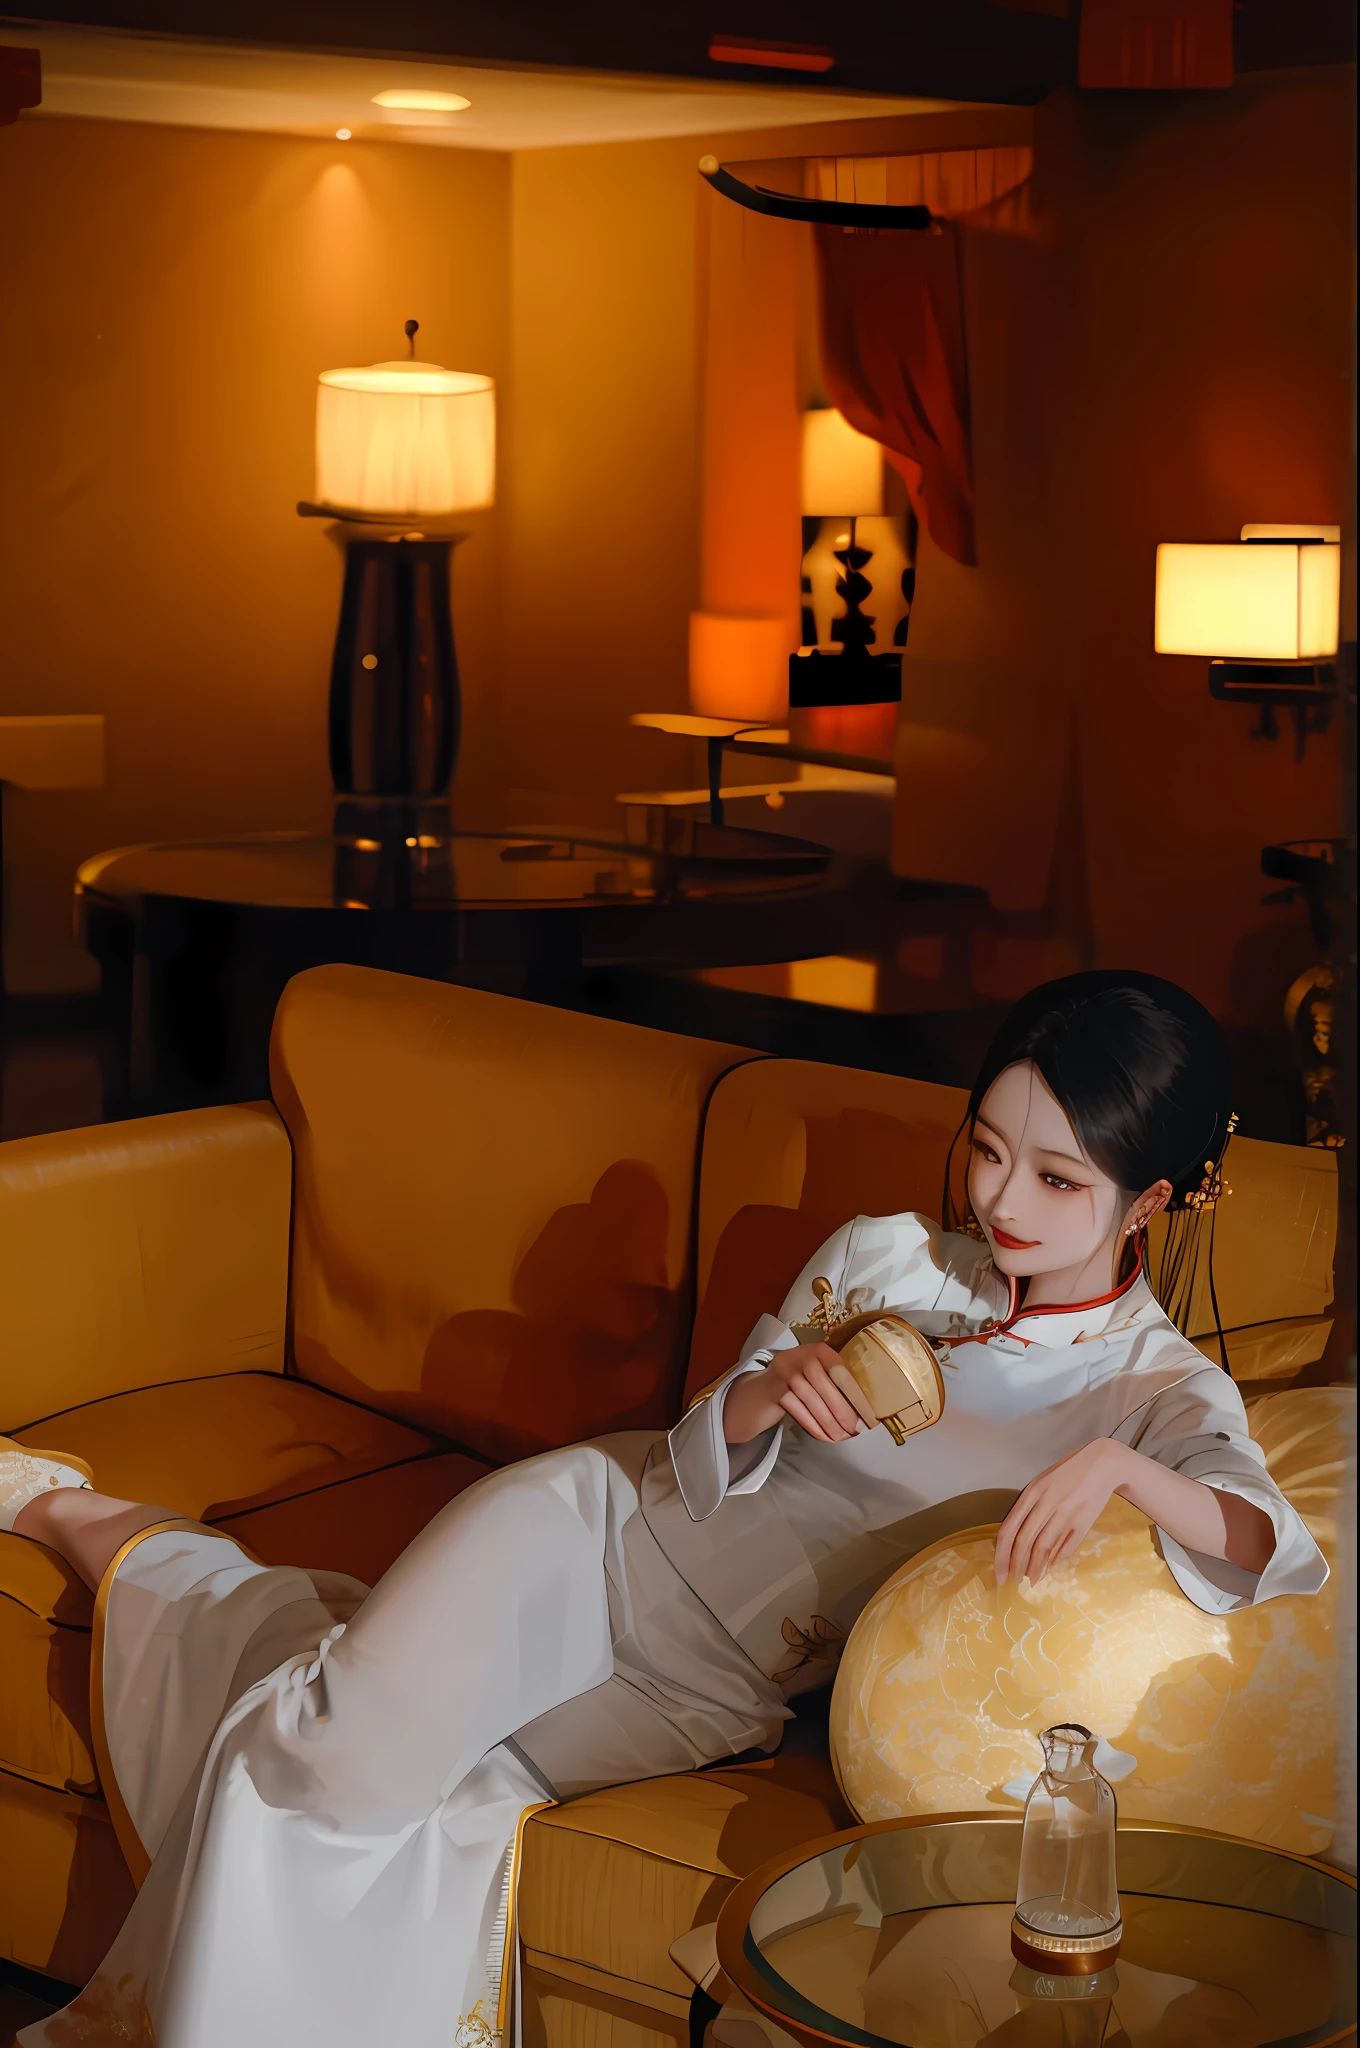 woman in white dress laying on a couch in a hotel room, sha xi, inspired by Cheng Jiasui, inspired by Qian Du, inspired by Zhang Shuqi, lulu chen, inspired by Wang Lü, inspired by Wang Guxiang, ao dai, inspired by Gu An, inspired by Liu Haisu, inspired by Wang Meng, inspired by Jiang Tingxi